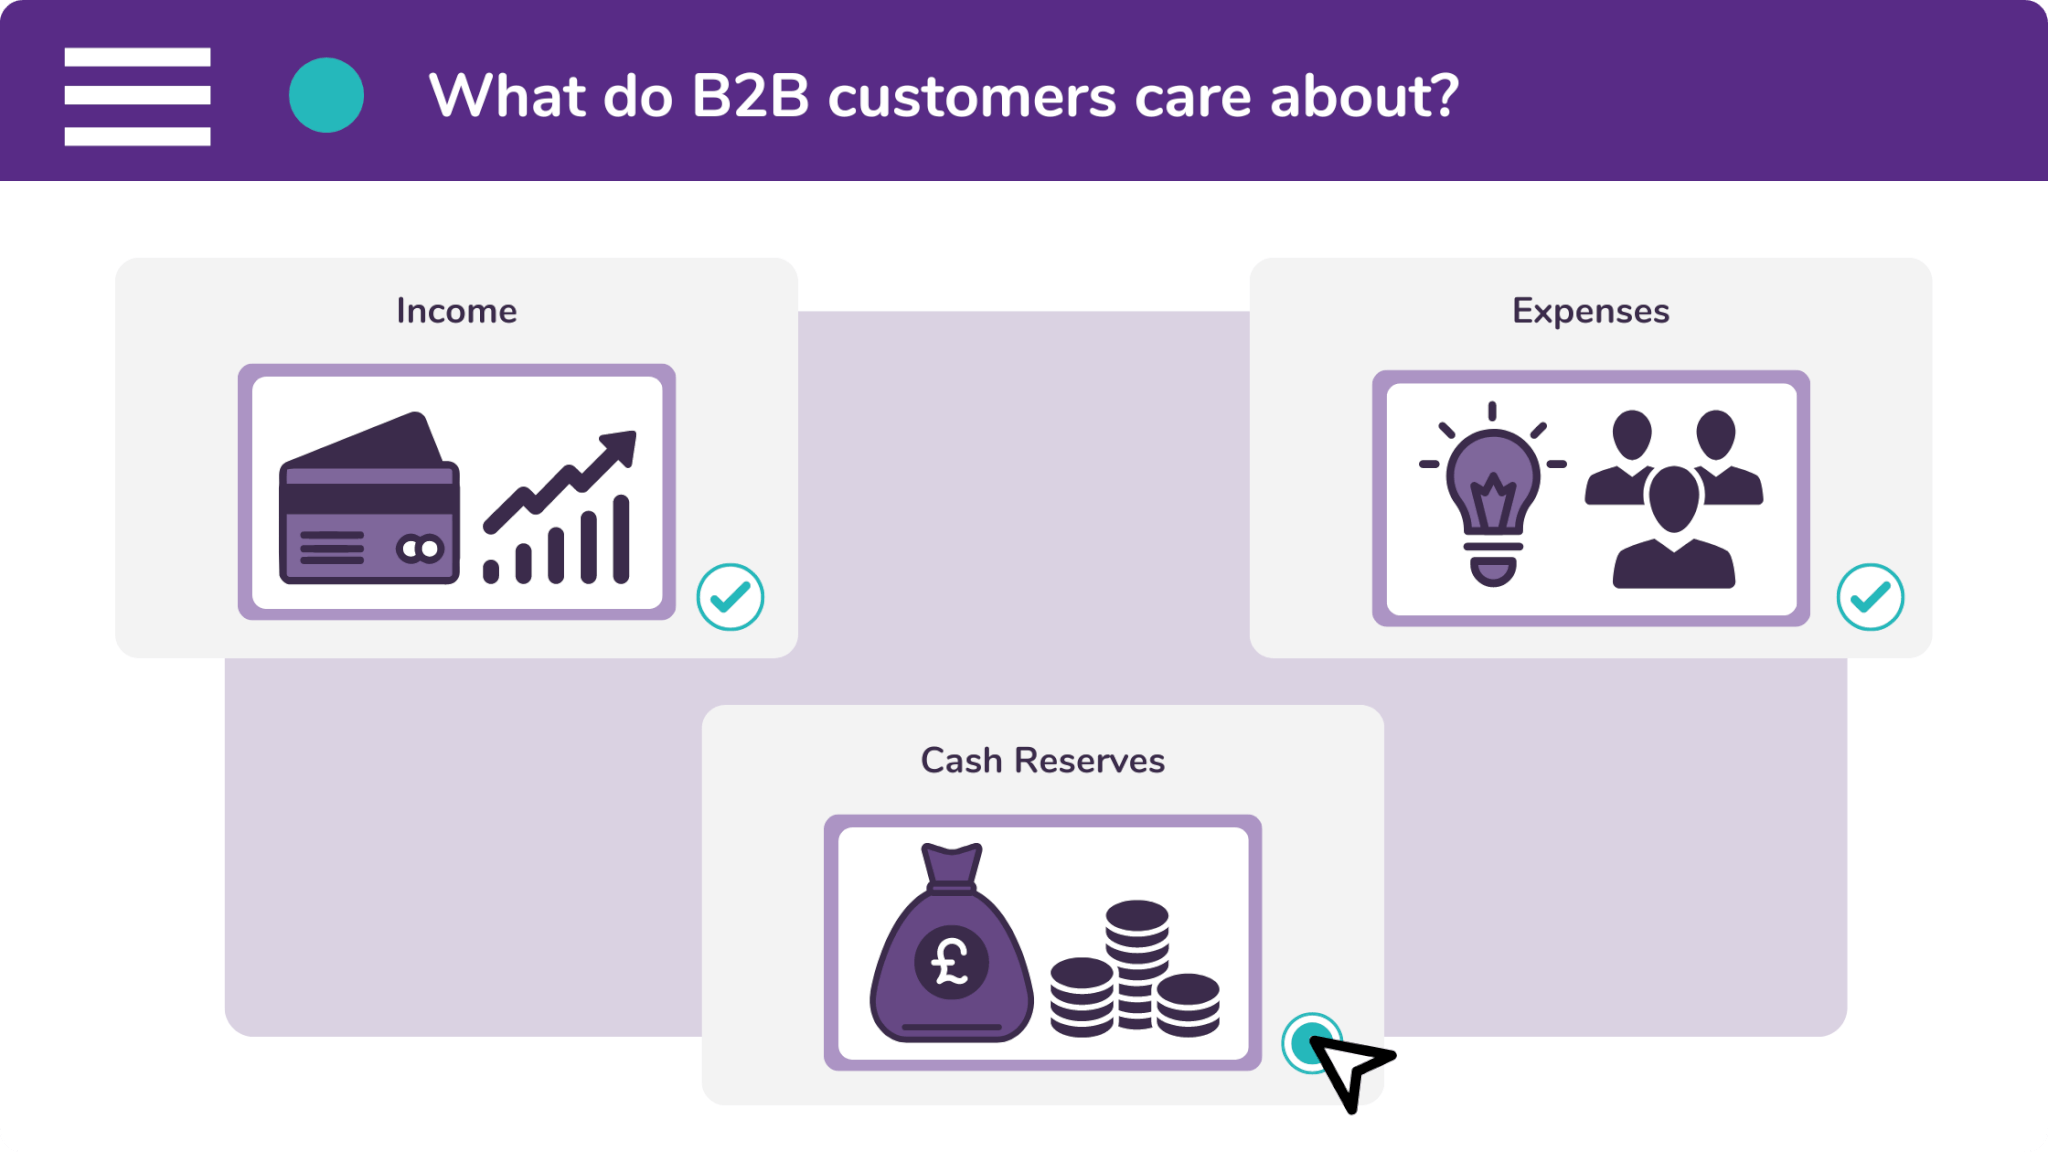 B2B customers care about income, expenses, and cash reserves above all else.